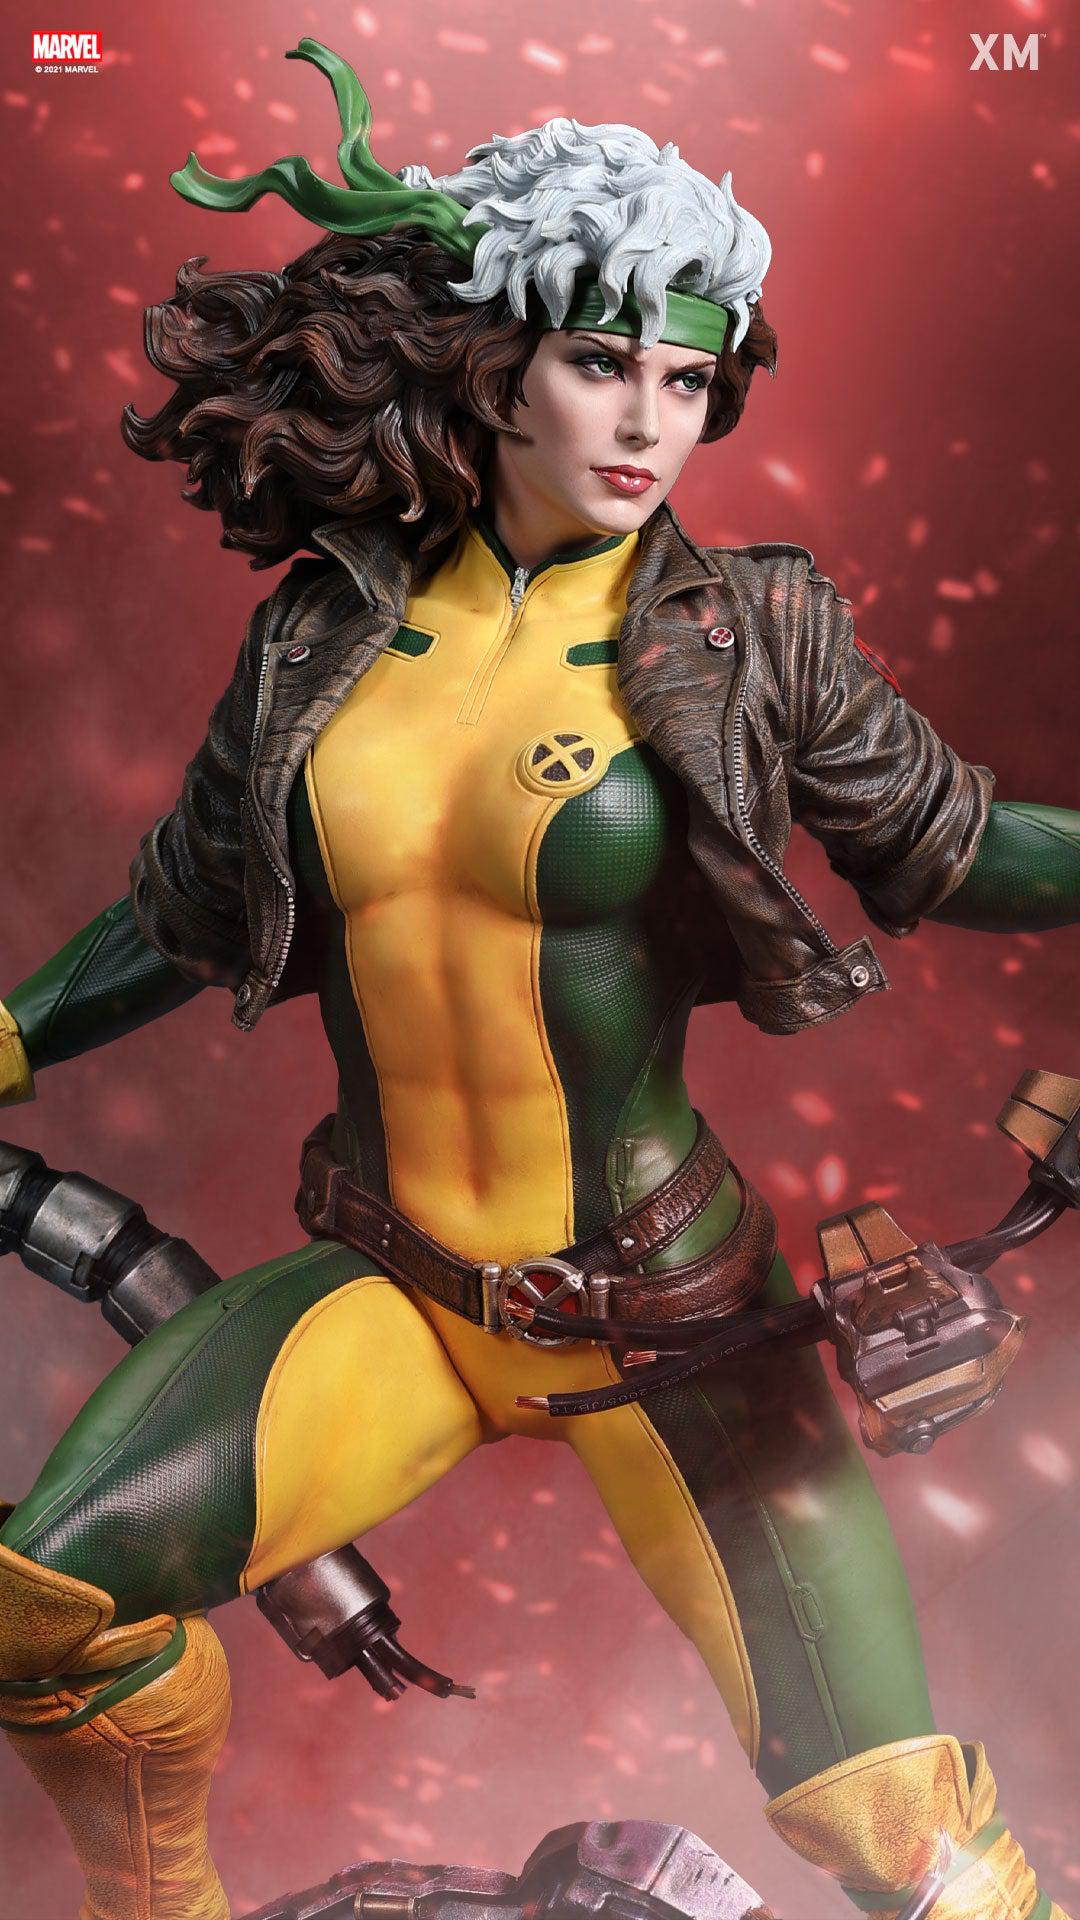 anil manoj recommends images of rogue from x men pic